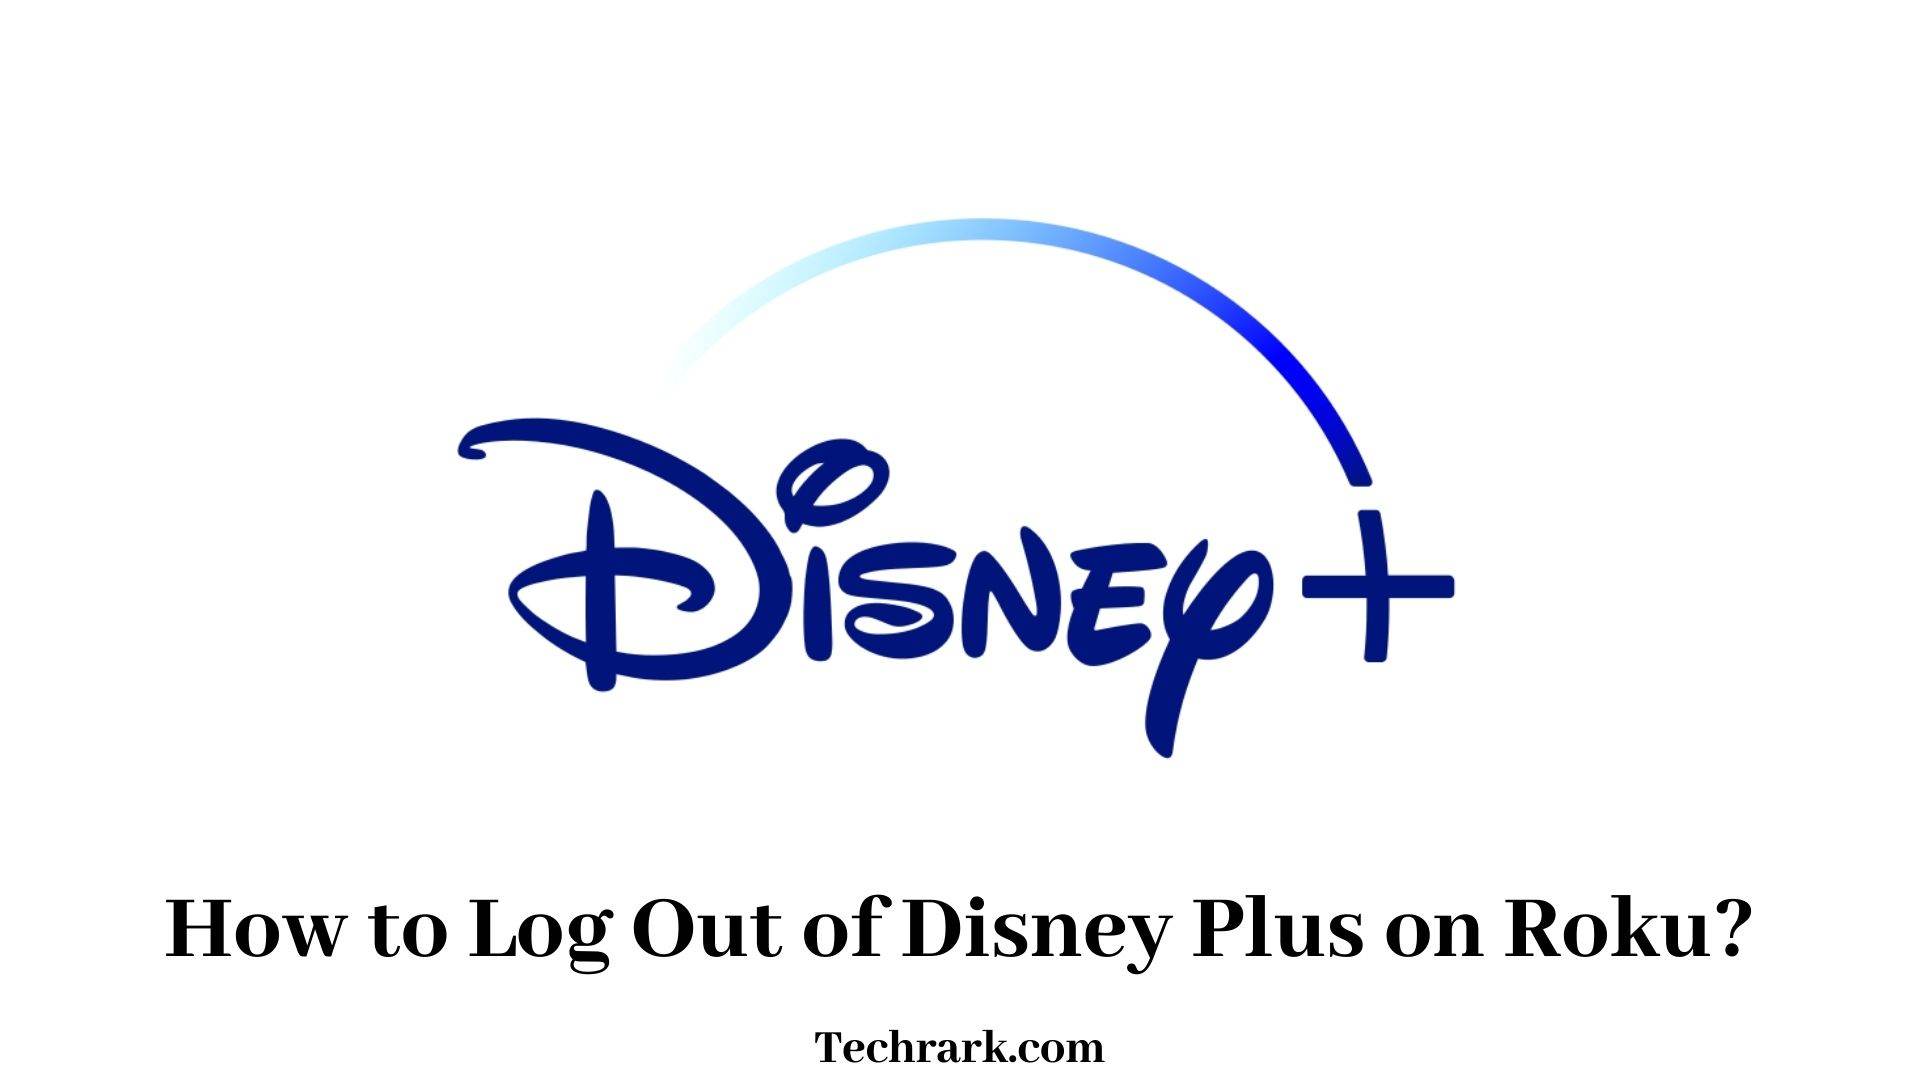 How to Log Out of Disney Plus on Roku Streaming Device? (Updated June 2022)